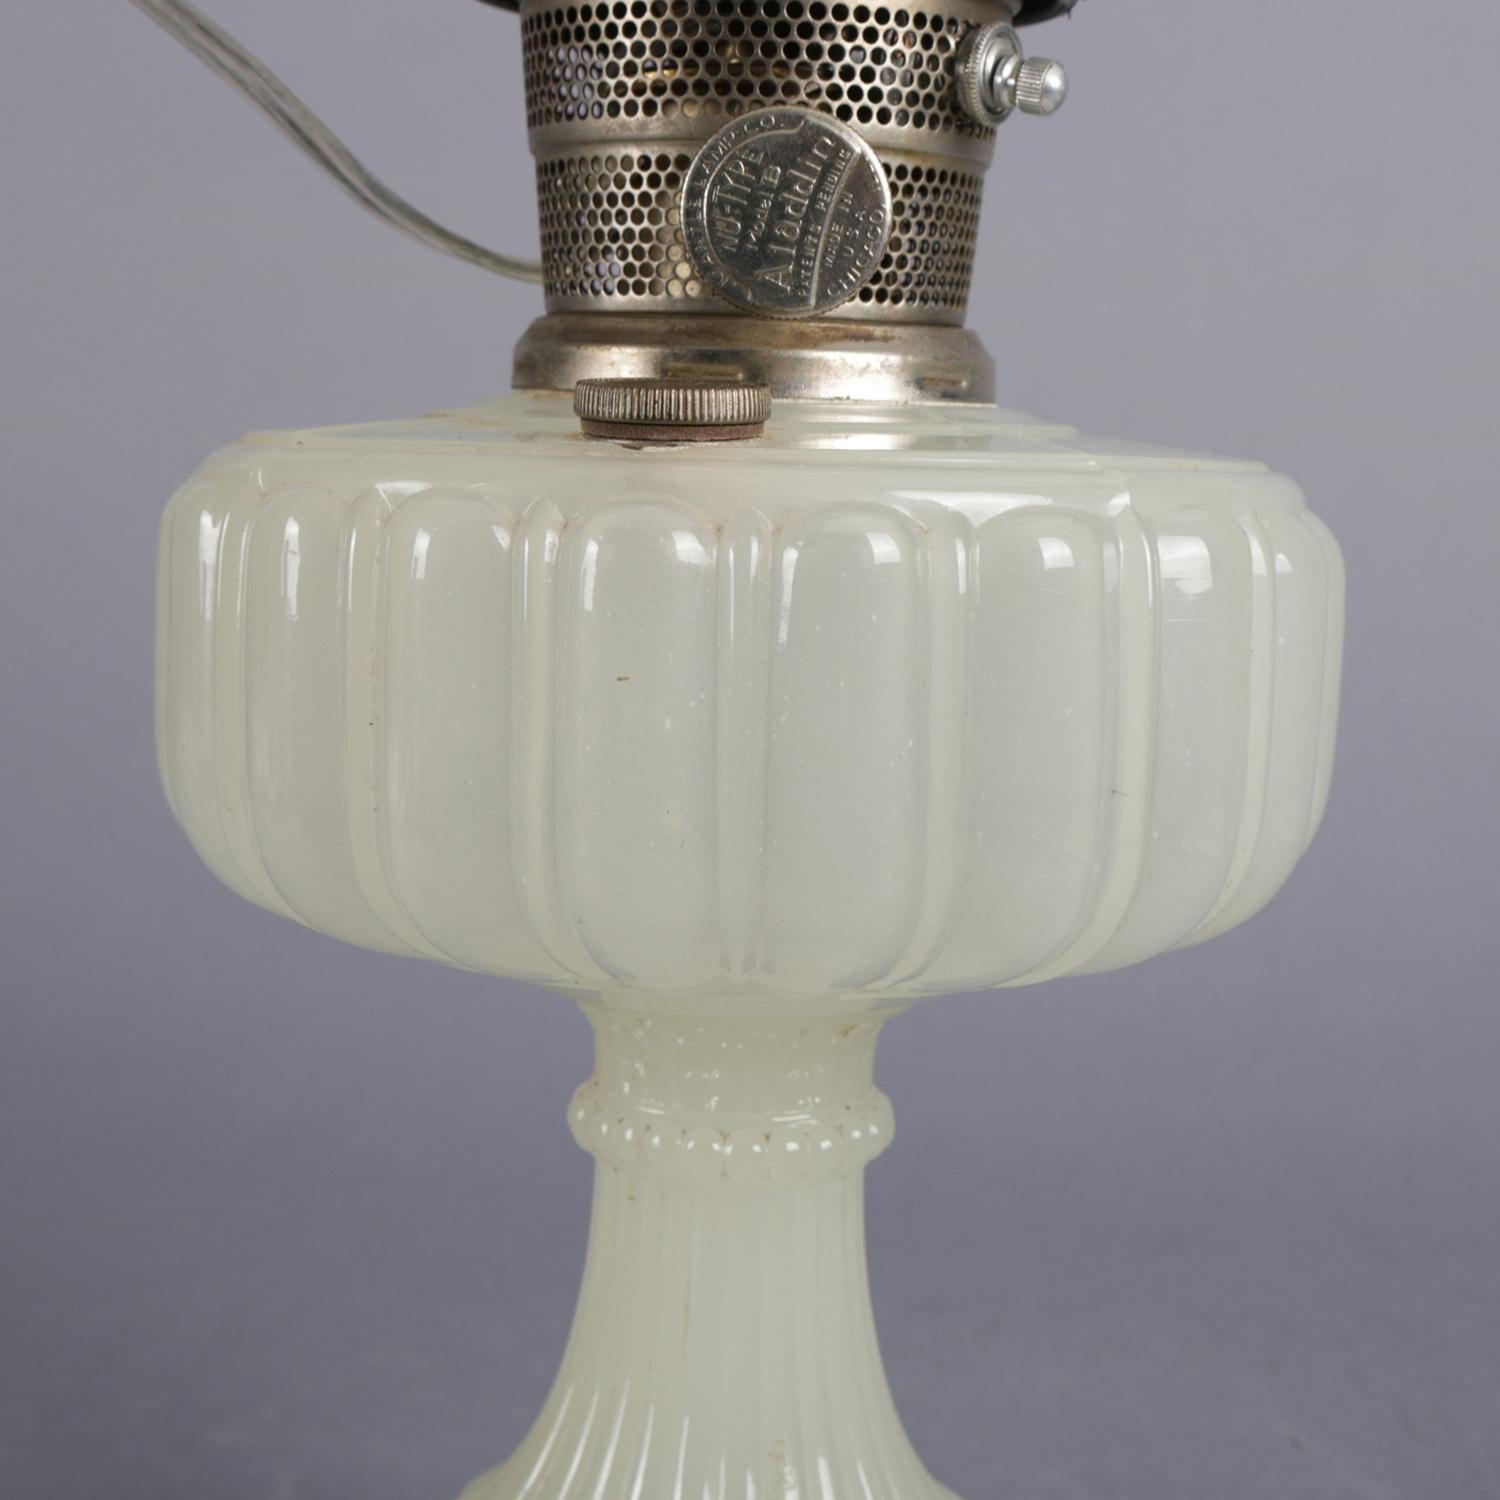 19th Century Antique Clambroth Glass Pedestal Electrified Table Lamp by Aladdin Co.